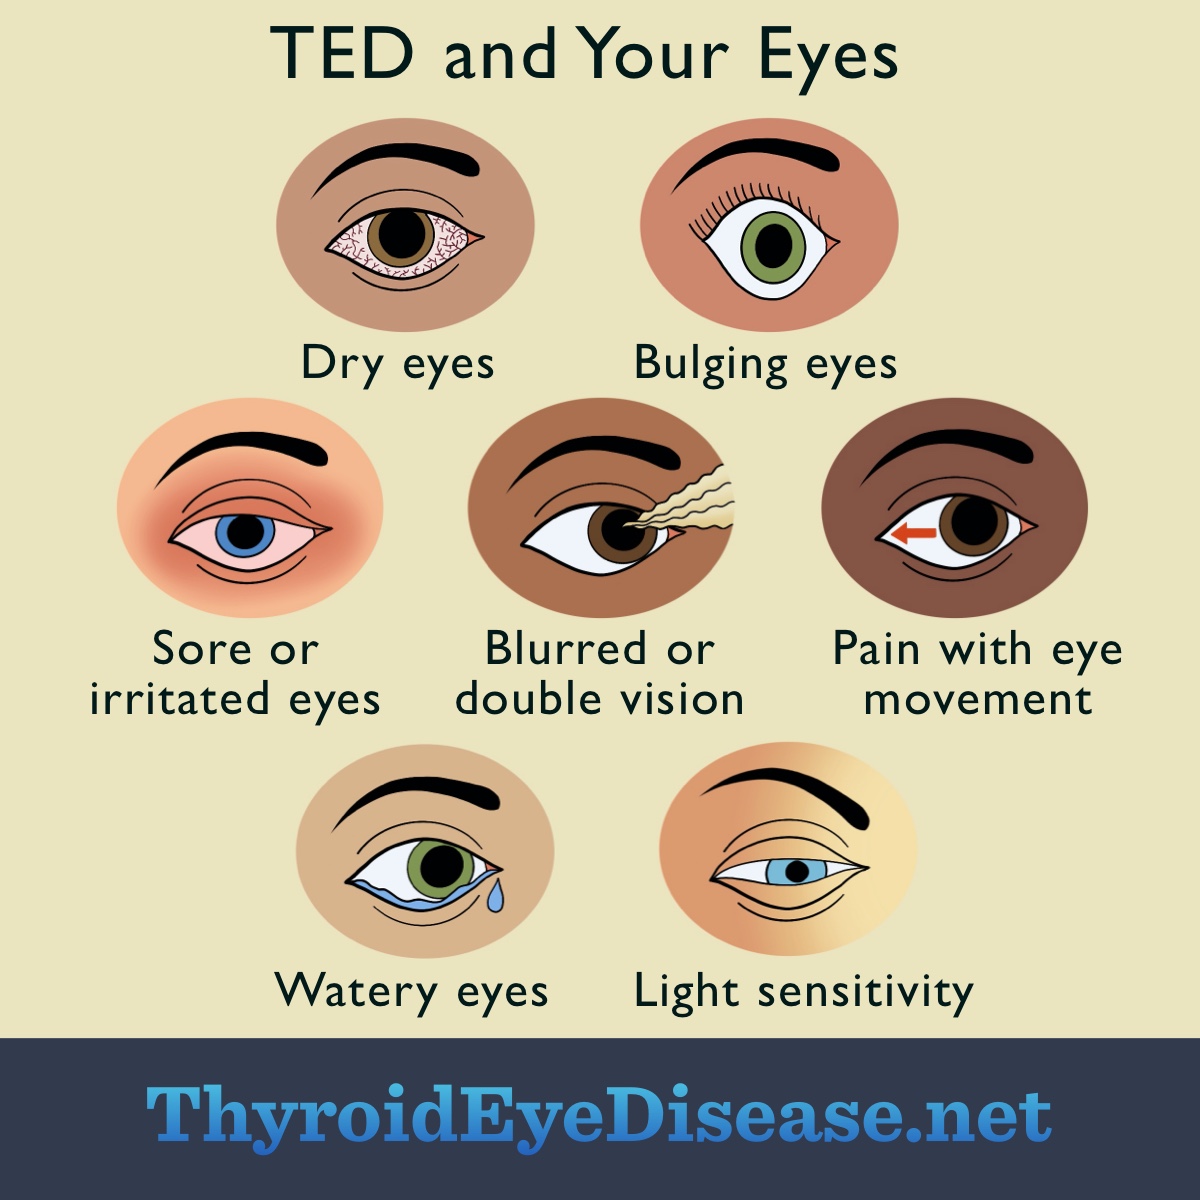 Eyes and TED: Dryness, bulging, sore, blurred vision, pain with movement, tears, light sensitivity.